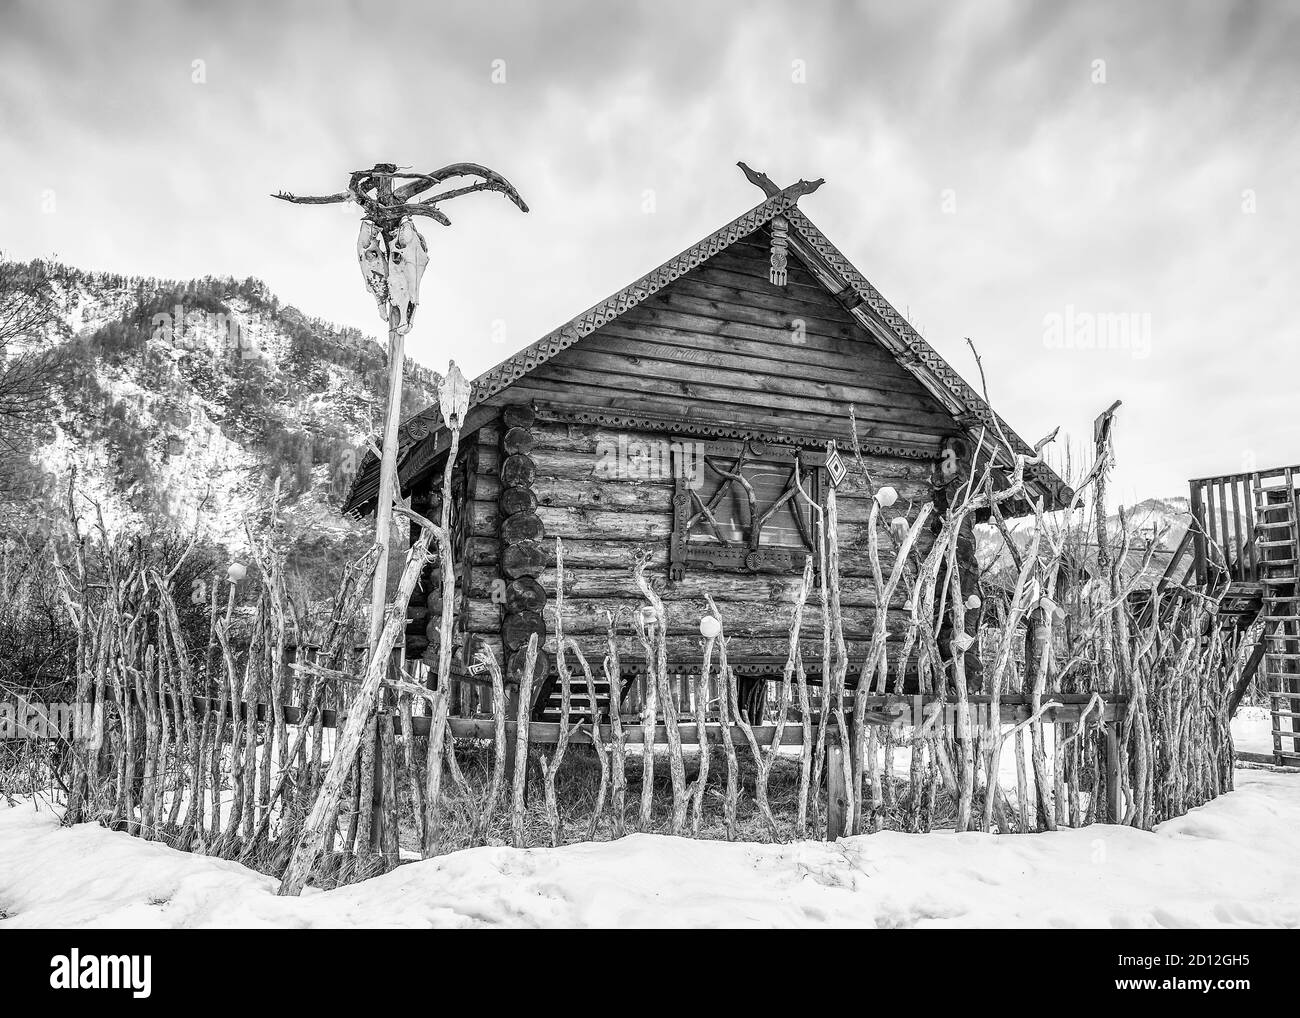 CHEPOSH VILLAGE, MOUNTAIN ALTAI, RUSSIA - MARCH 03, 2018: Wooden house resembling a hut on chicken legs from folk tales about Baba Yaga Stock Photo